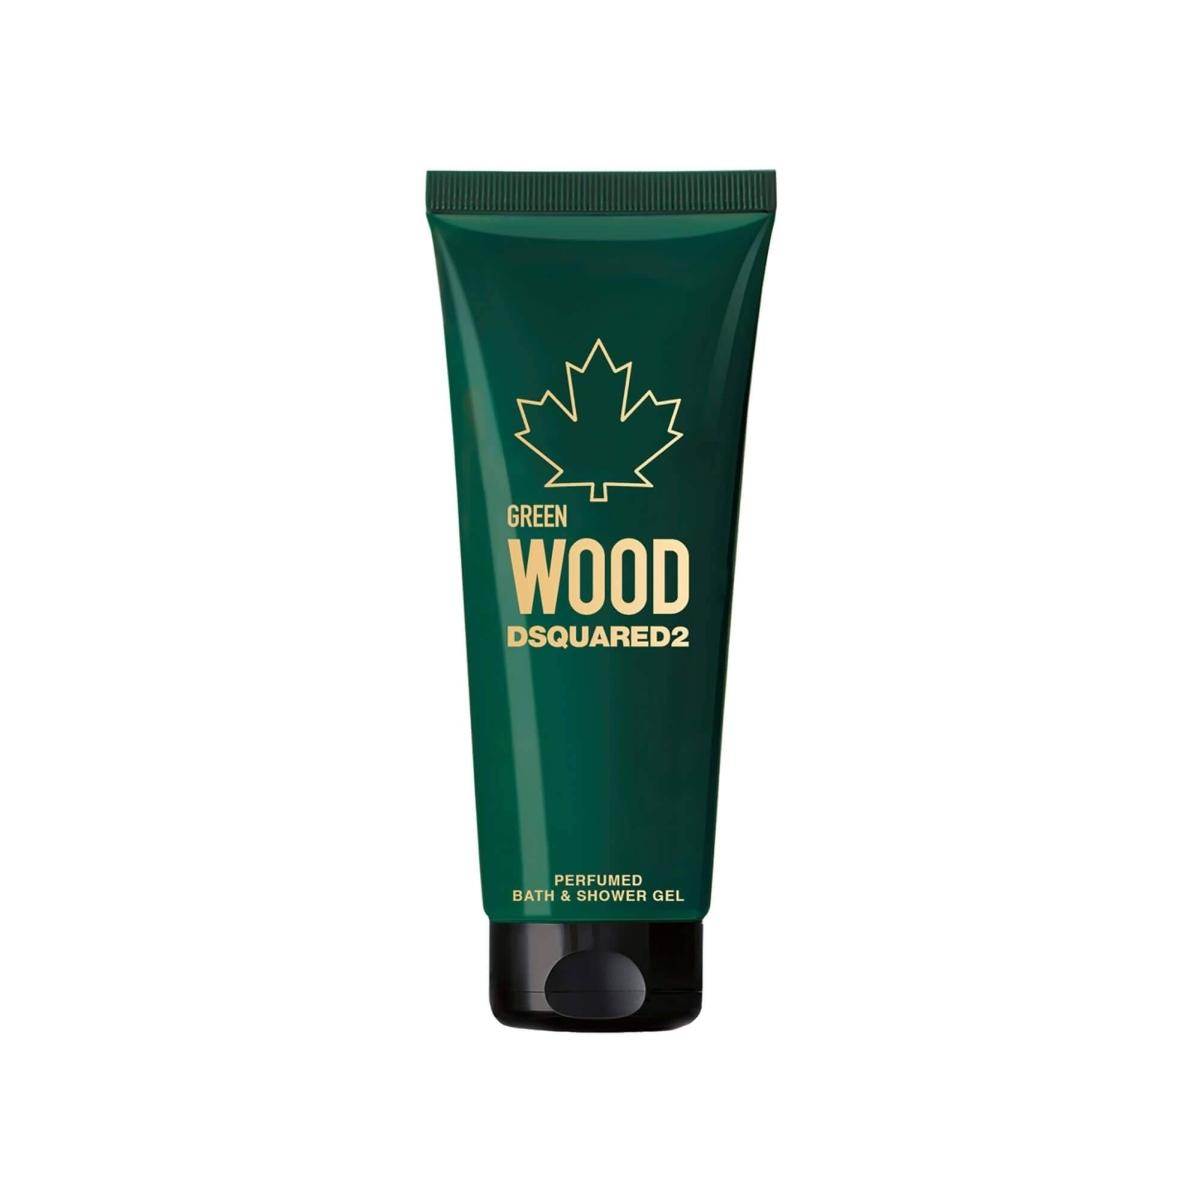 Green wood dsquared2 pour homme perfumed bath&shower gel tubo 250 ml